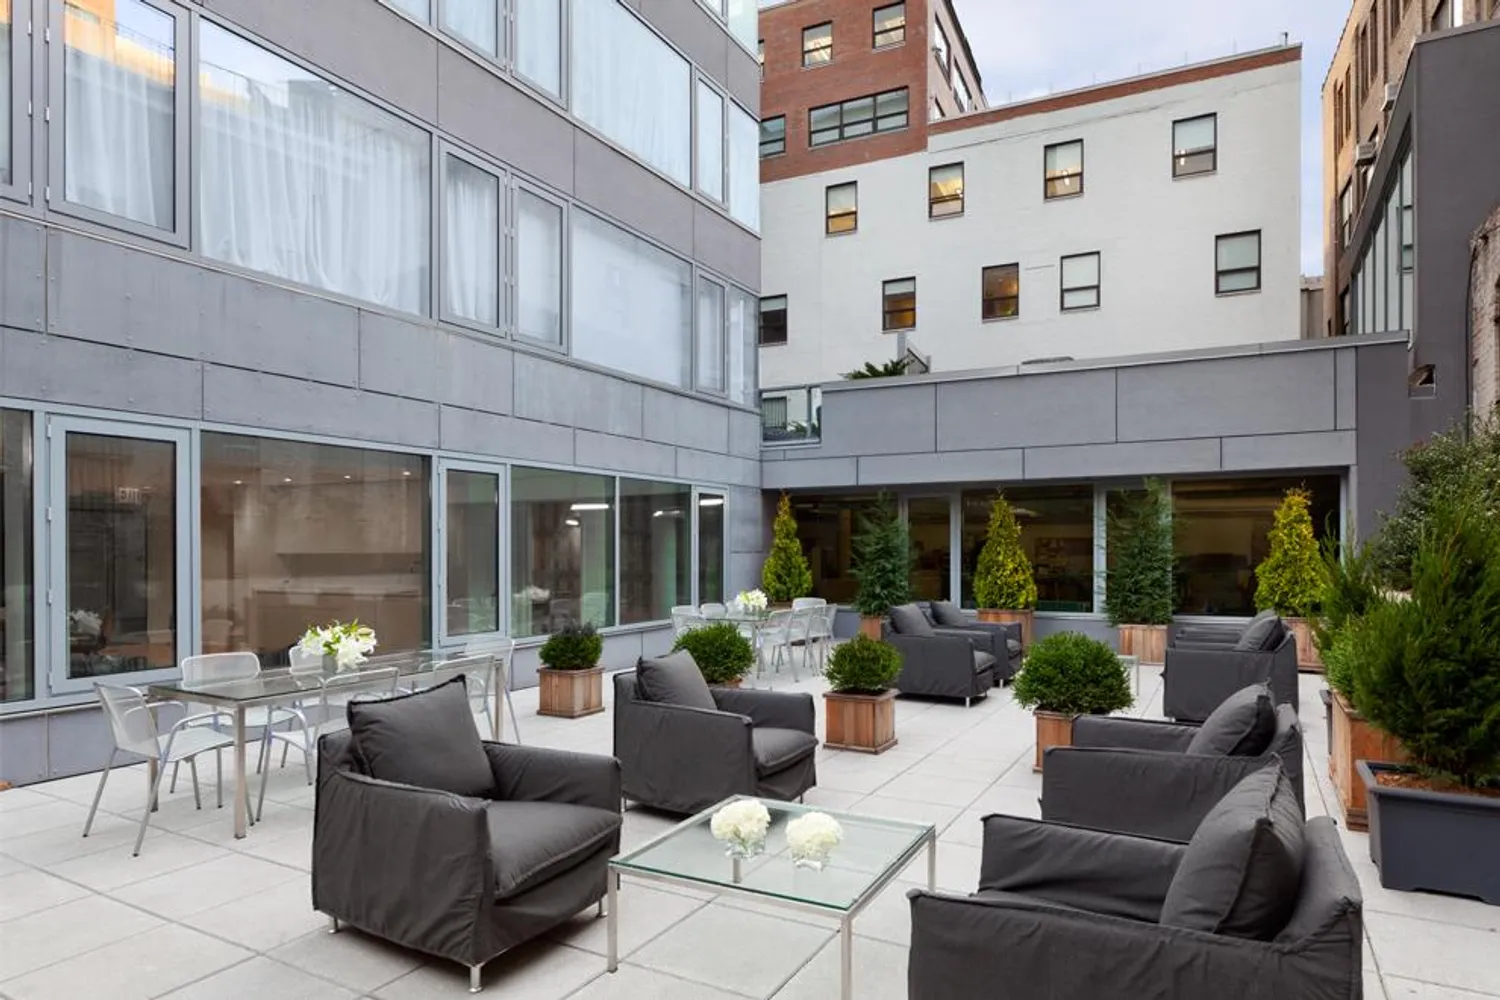 Outdoor terrace for residents